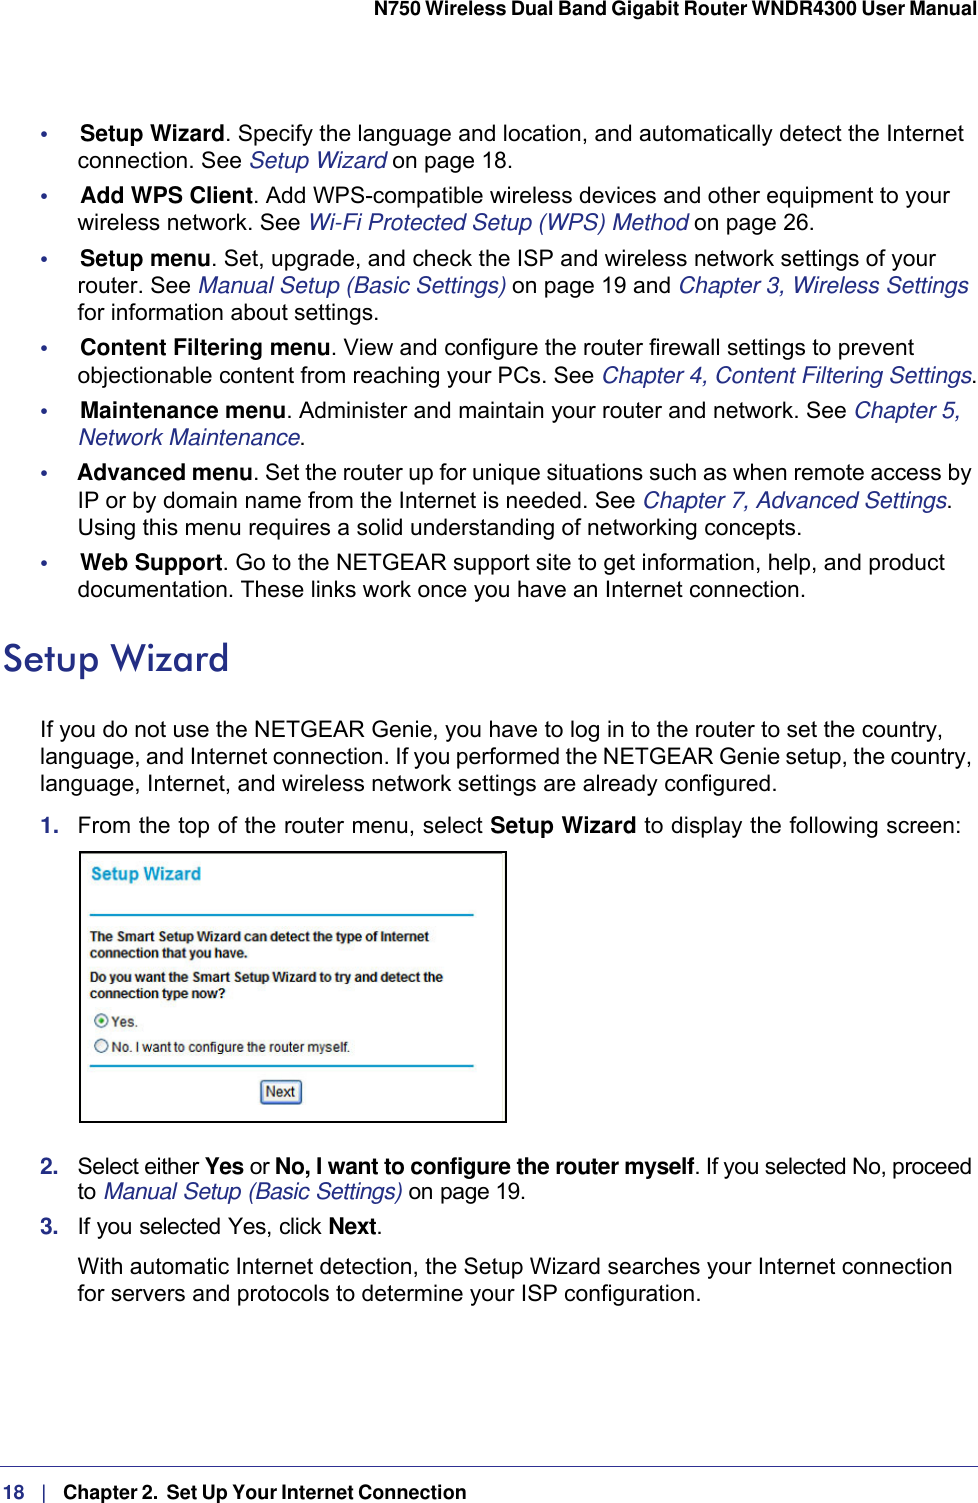 18   |   Chapter 2.  Set Up Your Internet Connection  N750 Wireless Dual Band Gigabit Router WNDR4300 User Manual •     Setup Wizard. Specify the language and location, and automatically detect the Internet connection. See Setup Wizard on page  18.•     Add WPS Client. Add WPS-compatible wireless devices and other equipment to your wireless network. See Wi-Fi Protected Setup (WPS) Method on page  26.•     Setup menu. Set, upgrade, and check the ISP and wireless network settings of your router. See Manual Setup (Basic Settings) on page  19 and Chapter 3, Wireless Settings for information about settings.•     Content Filtering menu. View and configure the router firewall settings to prevent objectionable content from reaching your PCs. See Chapter 4, Content Filtering Settings.•     Maintenance menu. Administer and maintain your router and network. See Chapter 5, Network Maintenance.•     Advanced menu. Set the router up for unique situations such as when remote access by IP or by domain name from the Internet is needed. See Chapter 7, Advanced Settings. Using this menu requires a solid understanding of networking concepts.•     Web Support. Go to the NETGEAR support site to get information, help, and product documentation. These links work once you have an Internet connection.Setup WizardIf you do not use the NETGEAR Genie, you have to log in to the router to set the country, language, and Internet connection. If you performed the NETGEAR Genie setup, the country, language, Internet, and wireless network settings are already configured.1.  From the top of the router menu, select Setup Wizard to display the following screen: 2.  Select either Yes or No, I want to configure the router myself. If you selected No, proceed to Manual Setup (Basic Settings) on page 19. 3.  If you selected Yes, click Next.With automatic Internet detection, the Setup Wizard searches your Internet connection for servers and protocols to determine your ISP configuration.